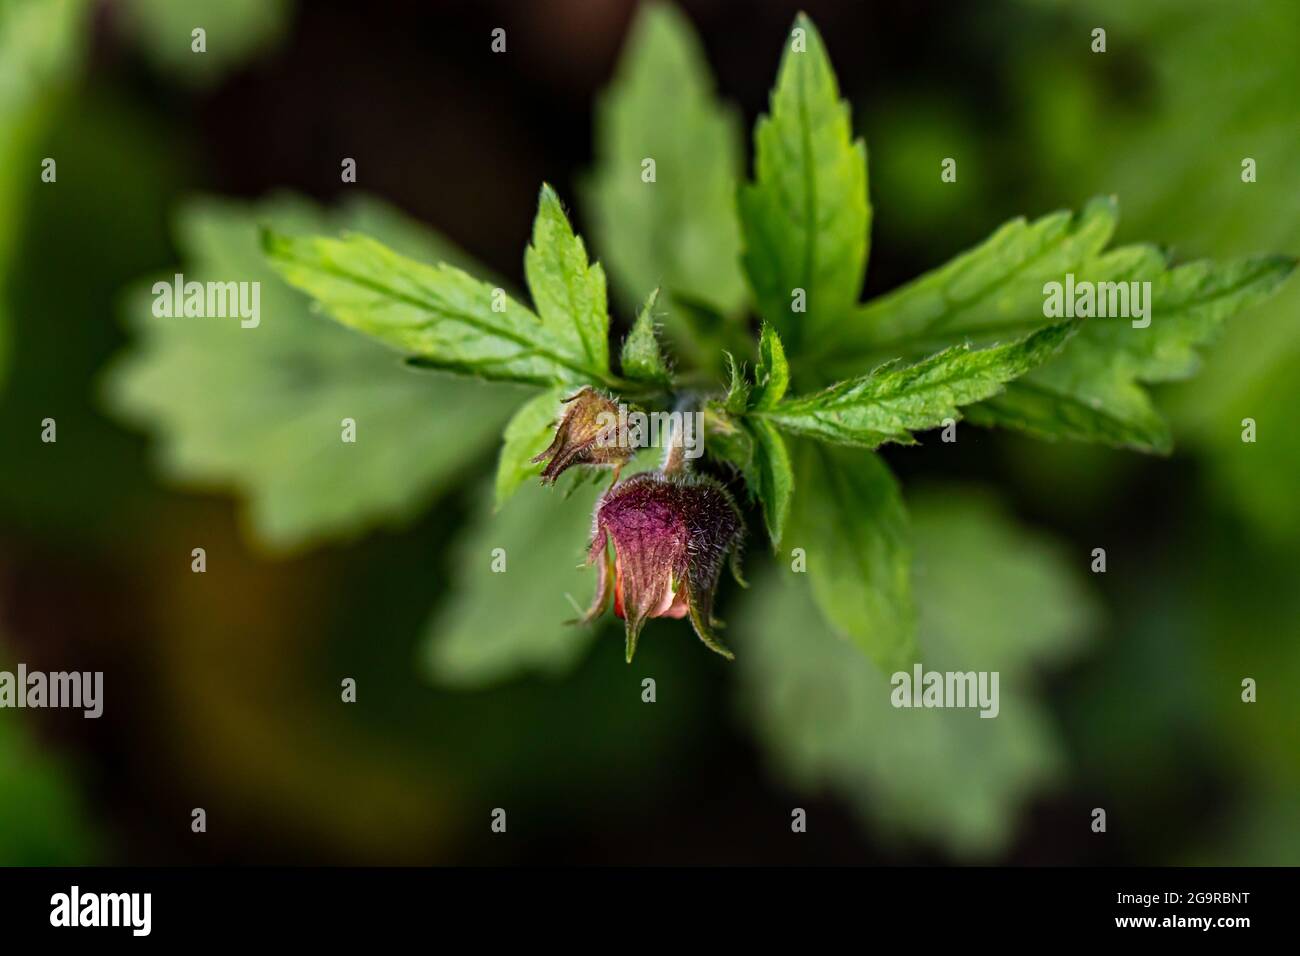 Geum rivale flower growing in forest, close up Stock Photo